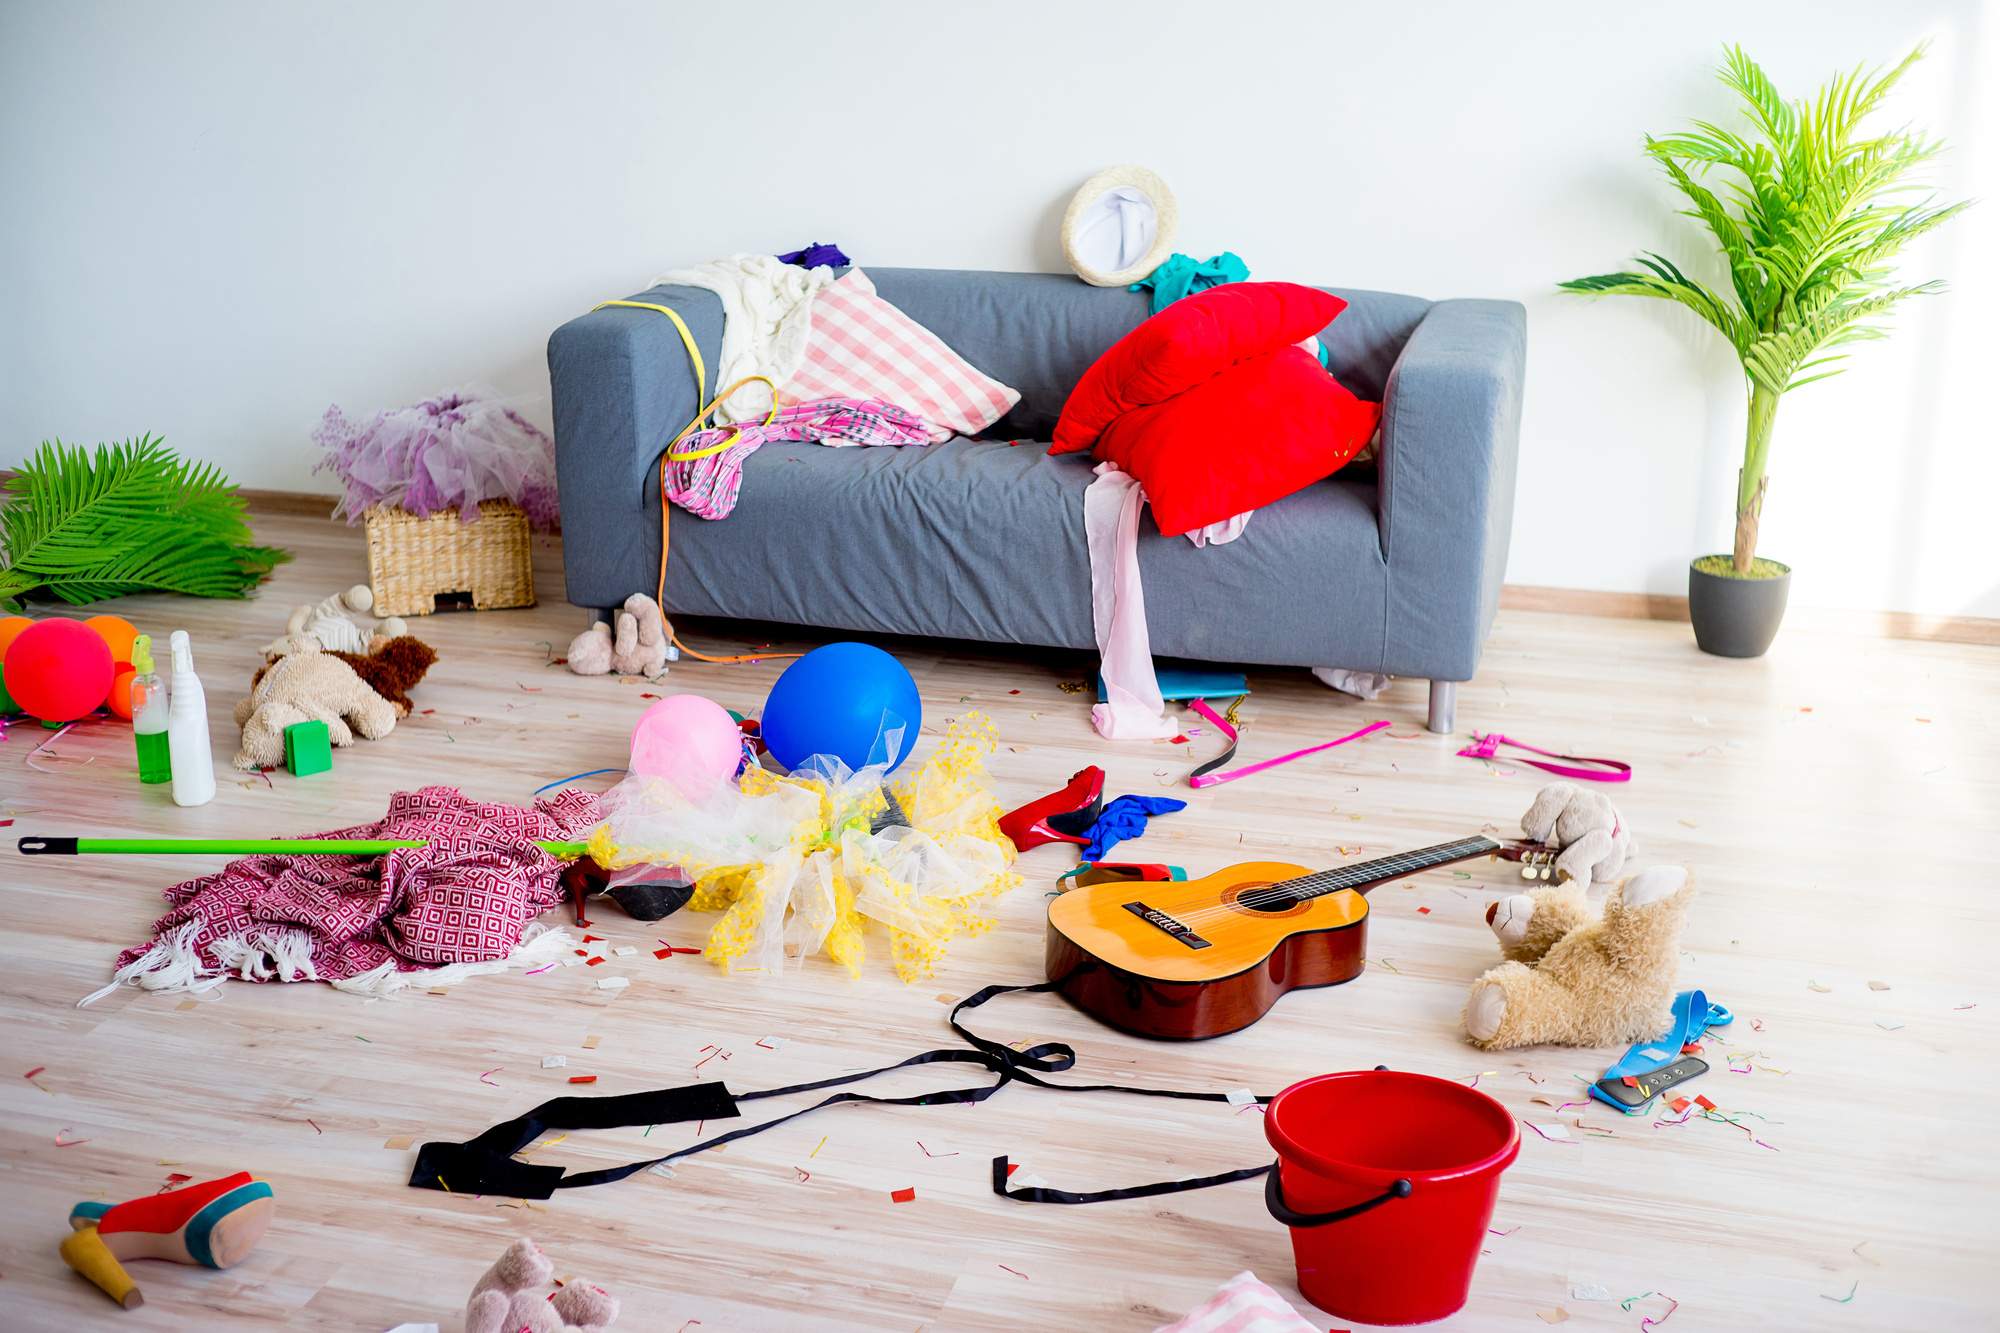 What Are the Causes of a Cluttered House?